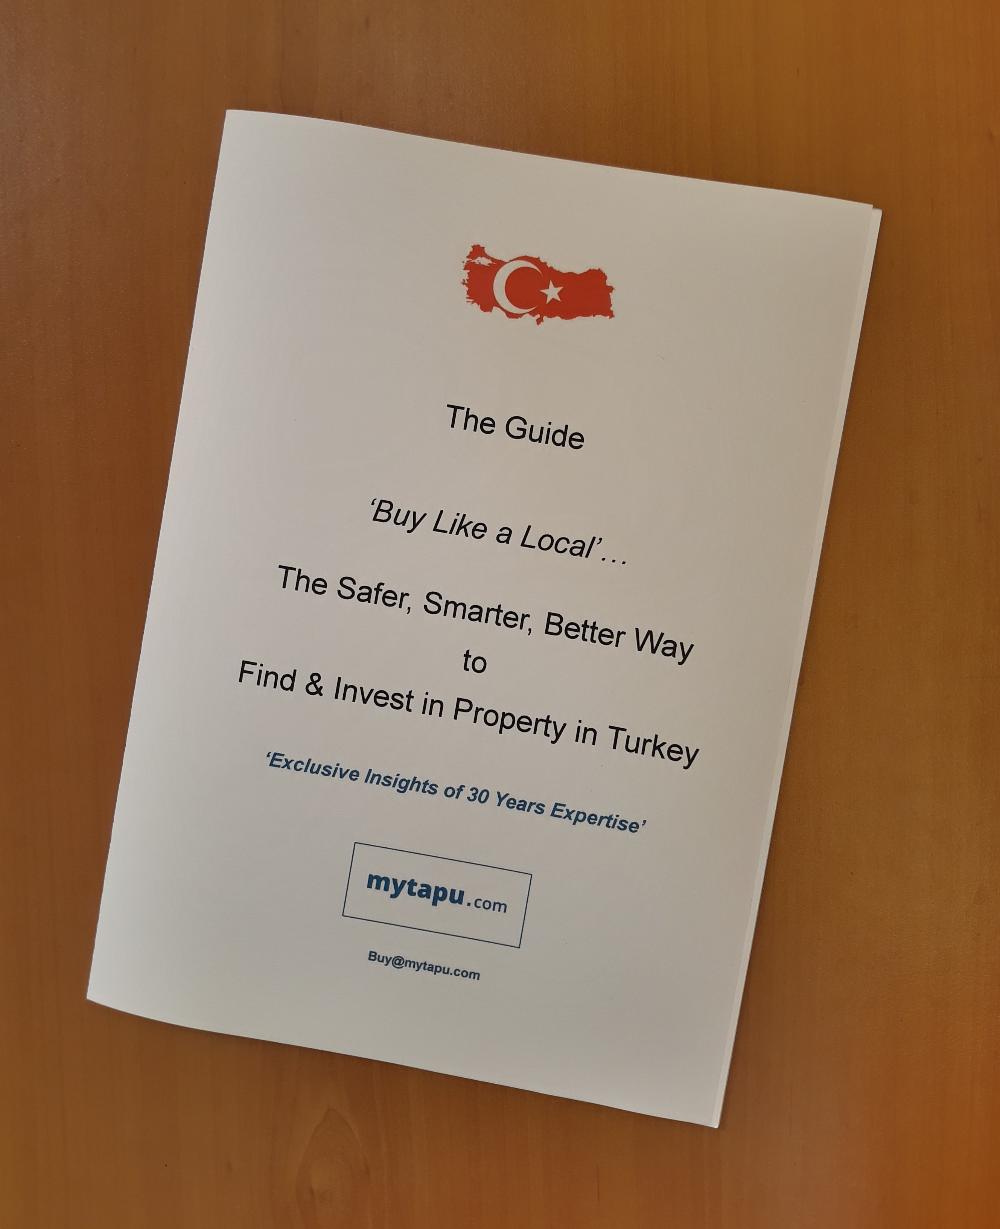 The Guide...'Buy Like a Local'... How to Find and Invest in Property in Turkey a Safer, Smarter, Better Way...